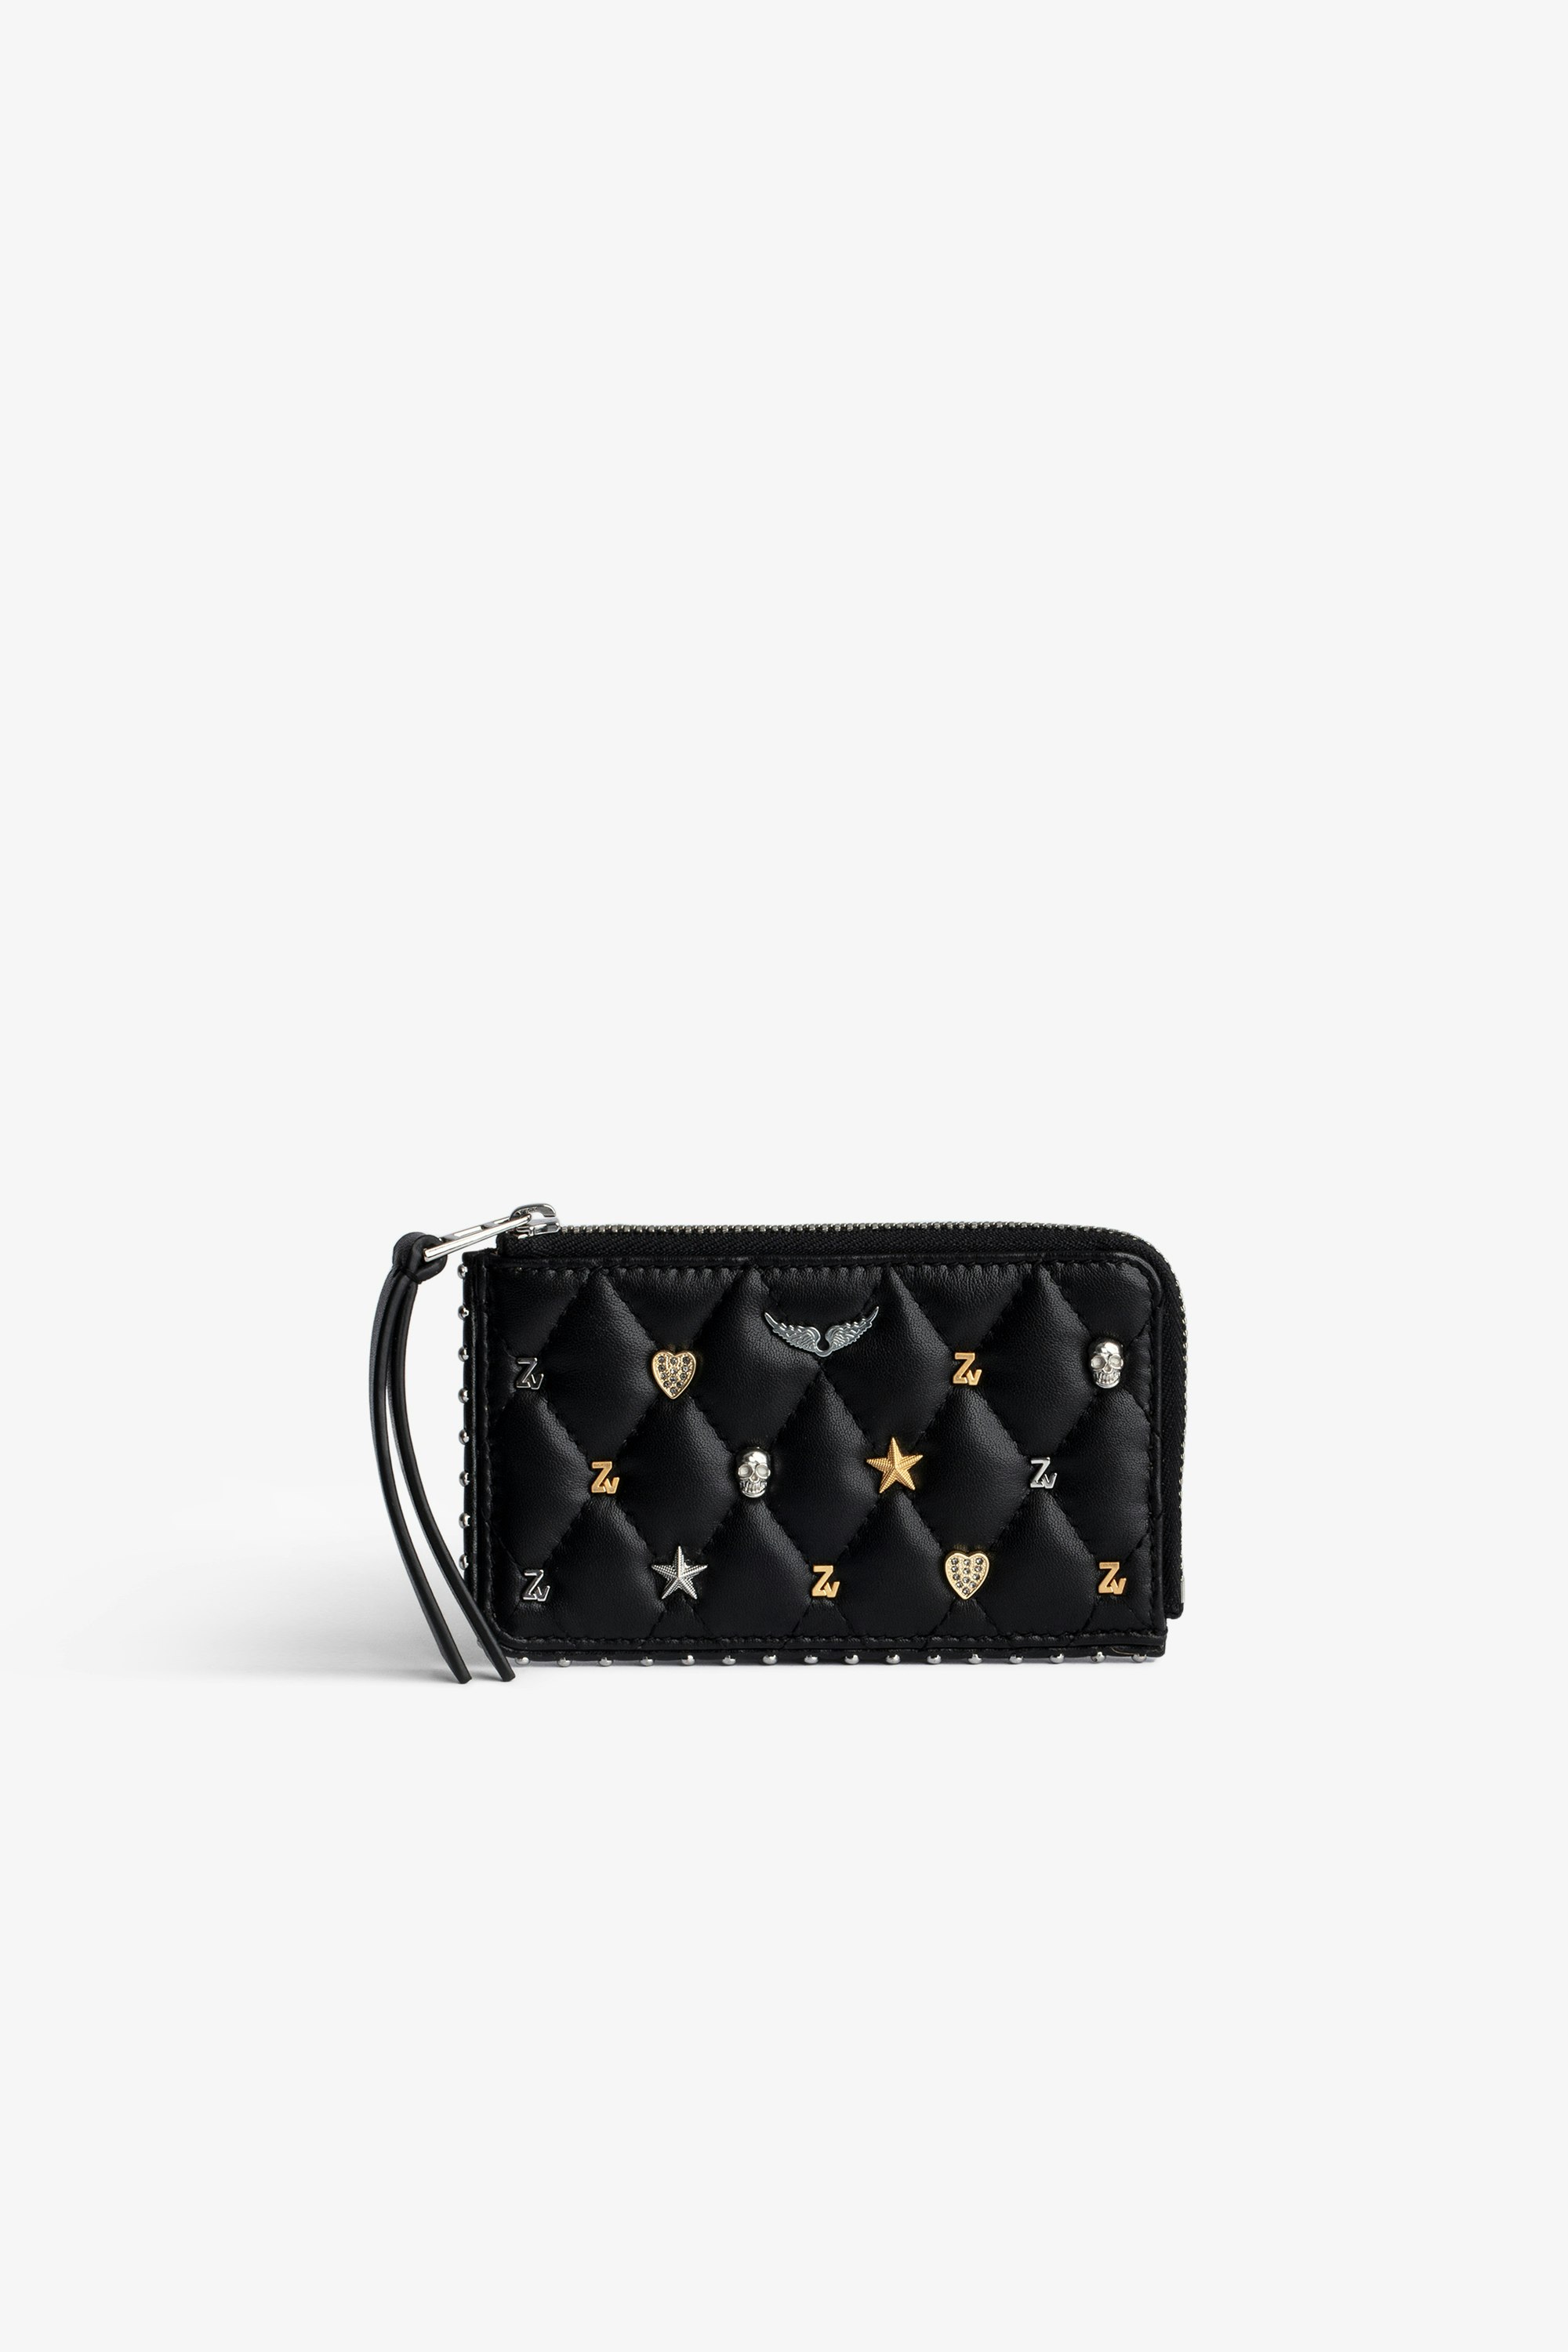 ZV Card Card Holder Women’s black quilted leather zipped card holder with silver- and gold-tone charms.